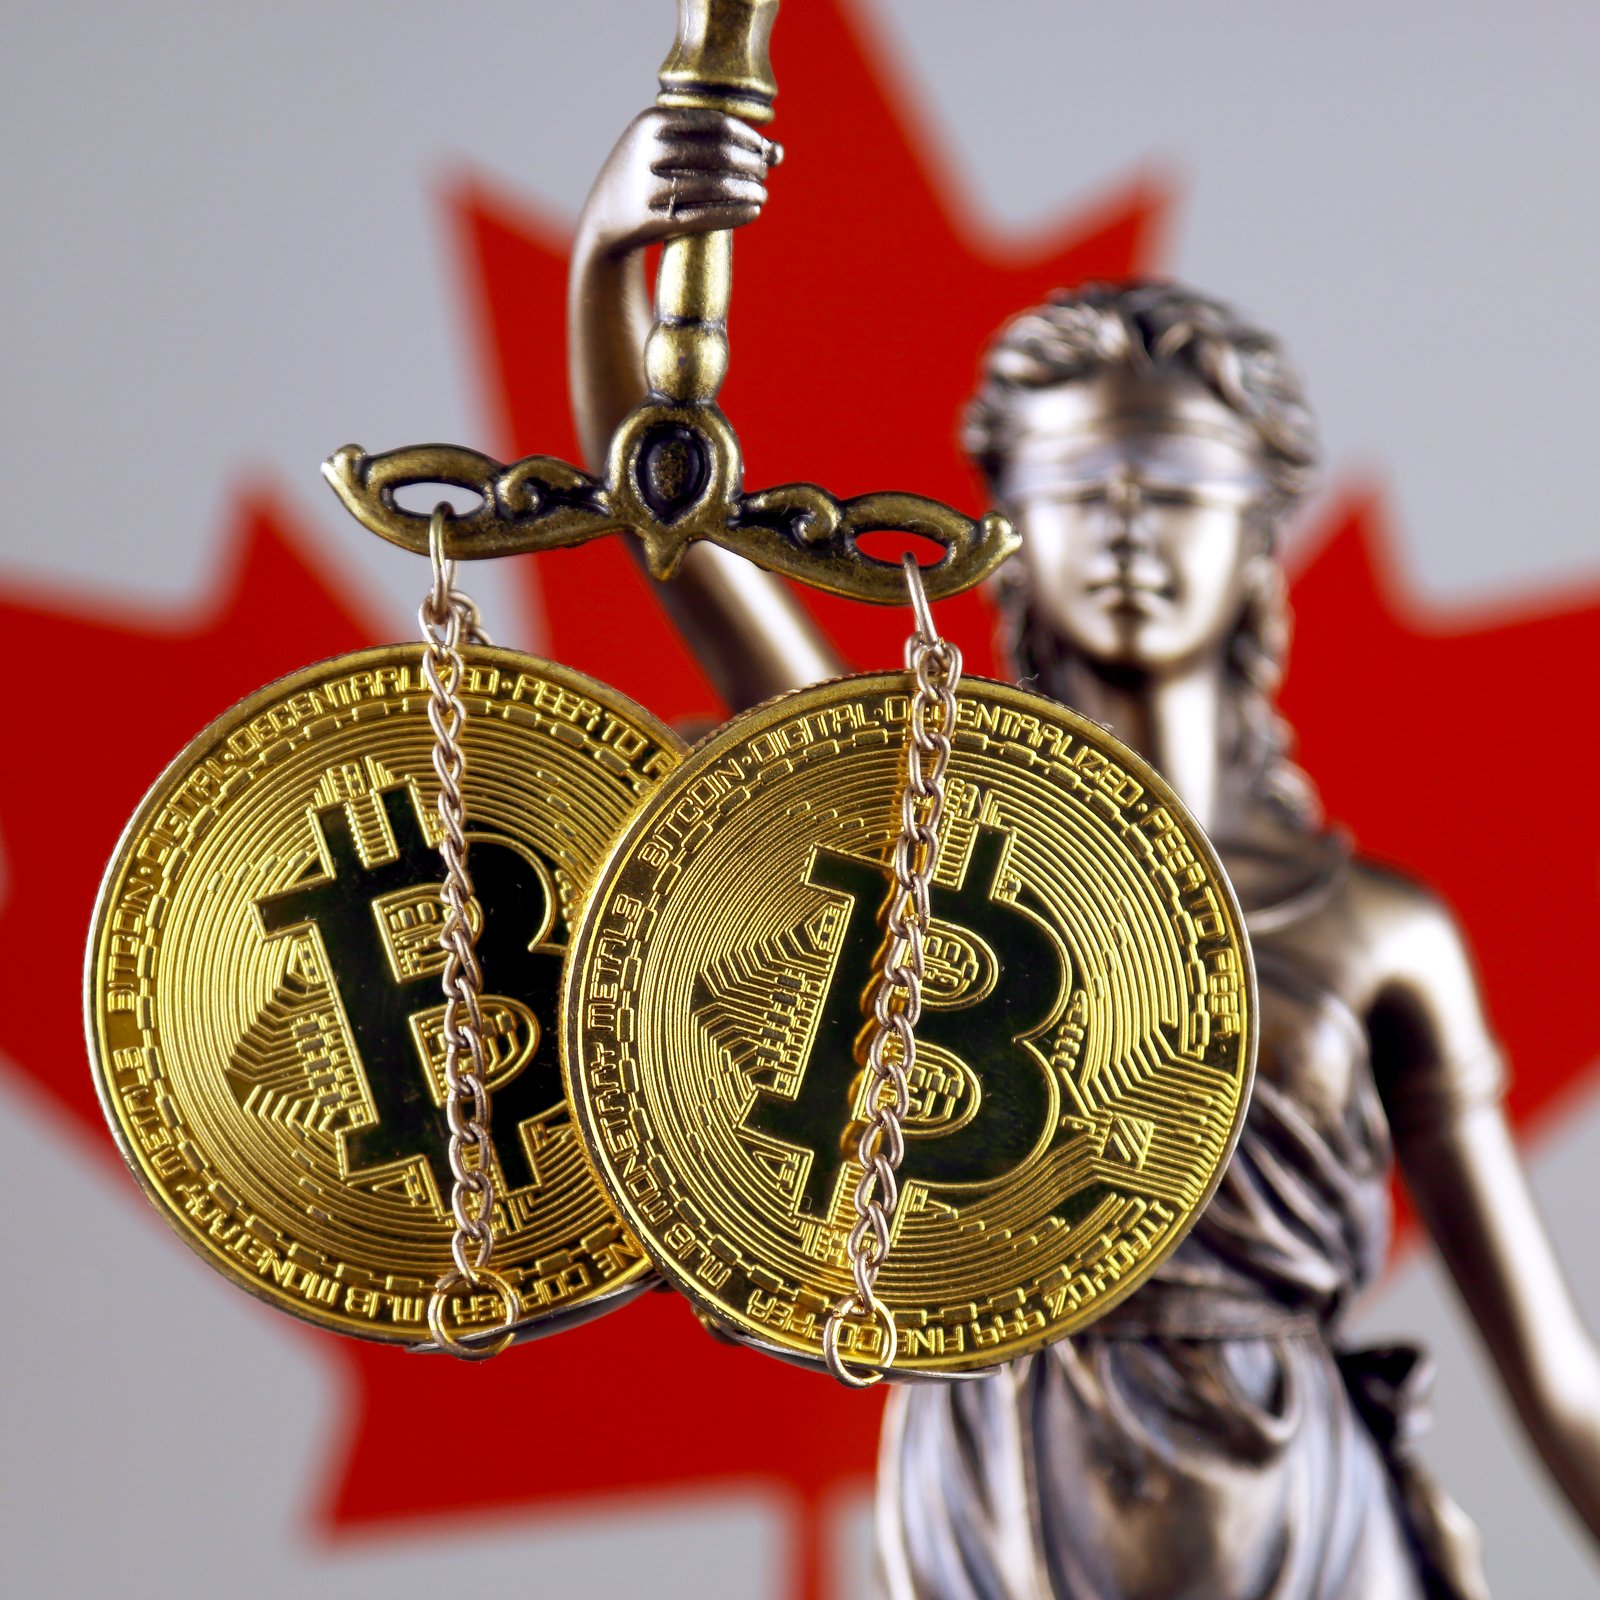 Canadian Exchanges to Report Transactions Over $10k per Proposed Regulations